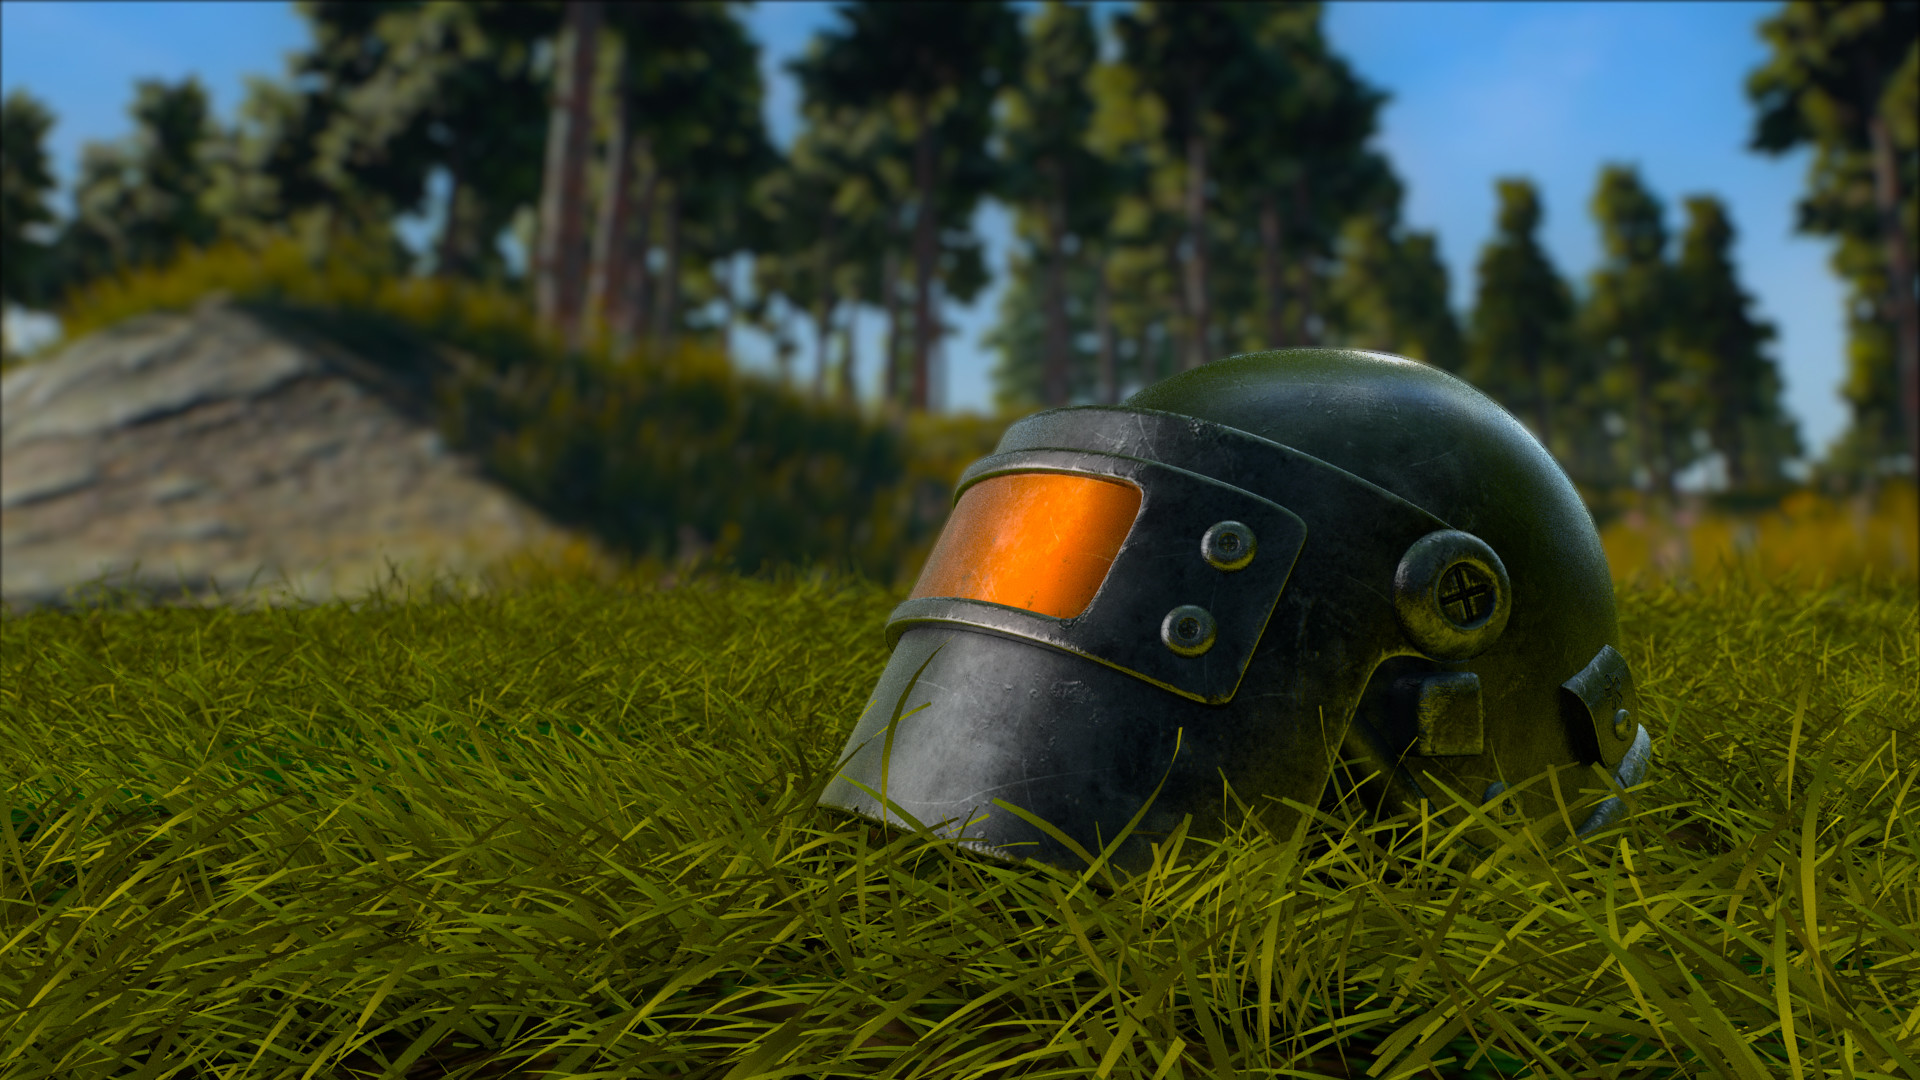 How to find a level 3 helmet in PUBG - Quora